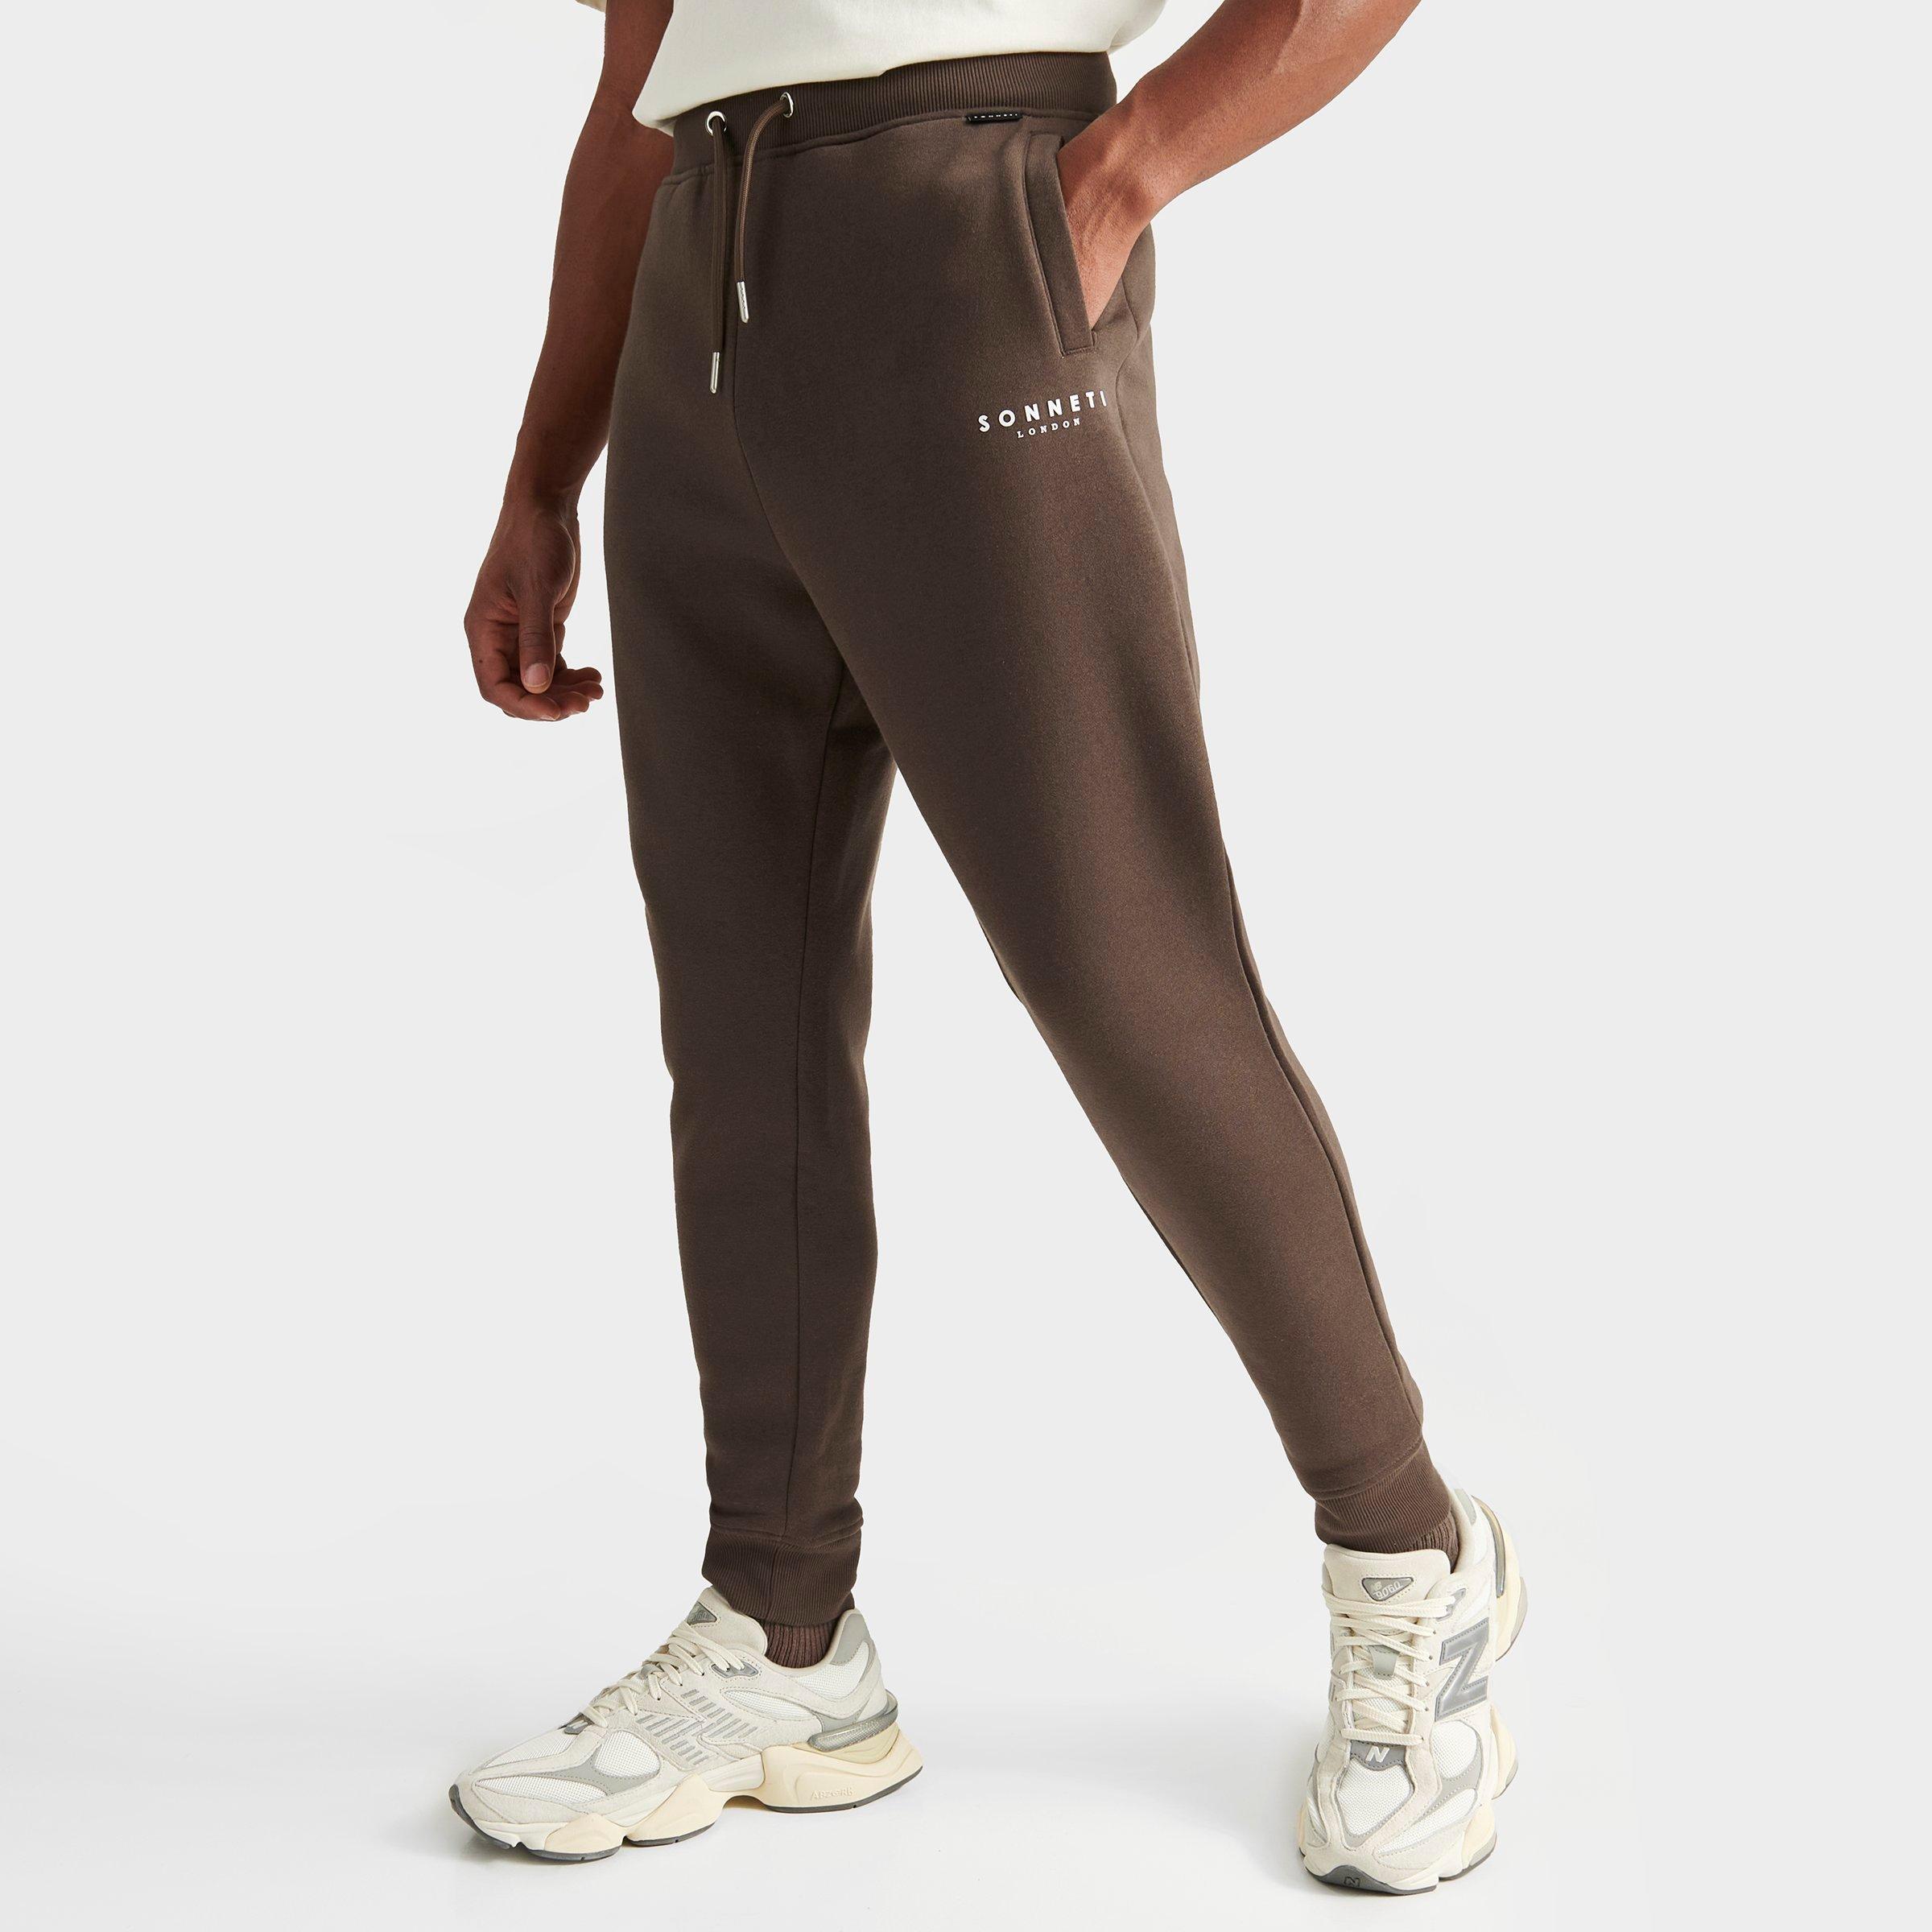 Sonneti London Jogger Pants Size 2xl In Chocolate Brown